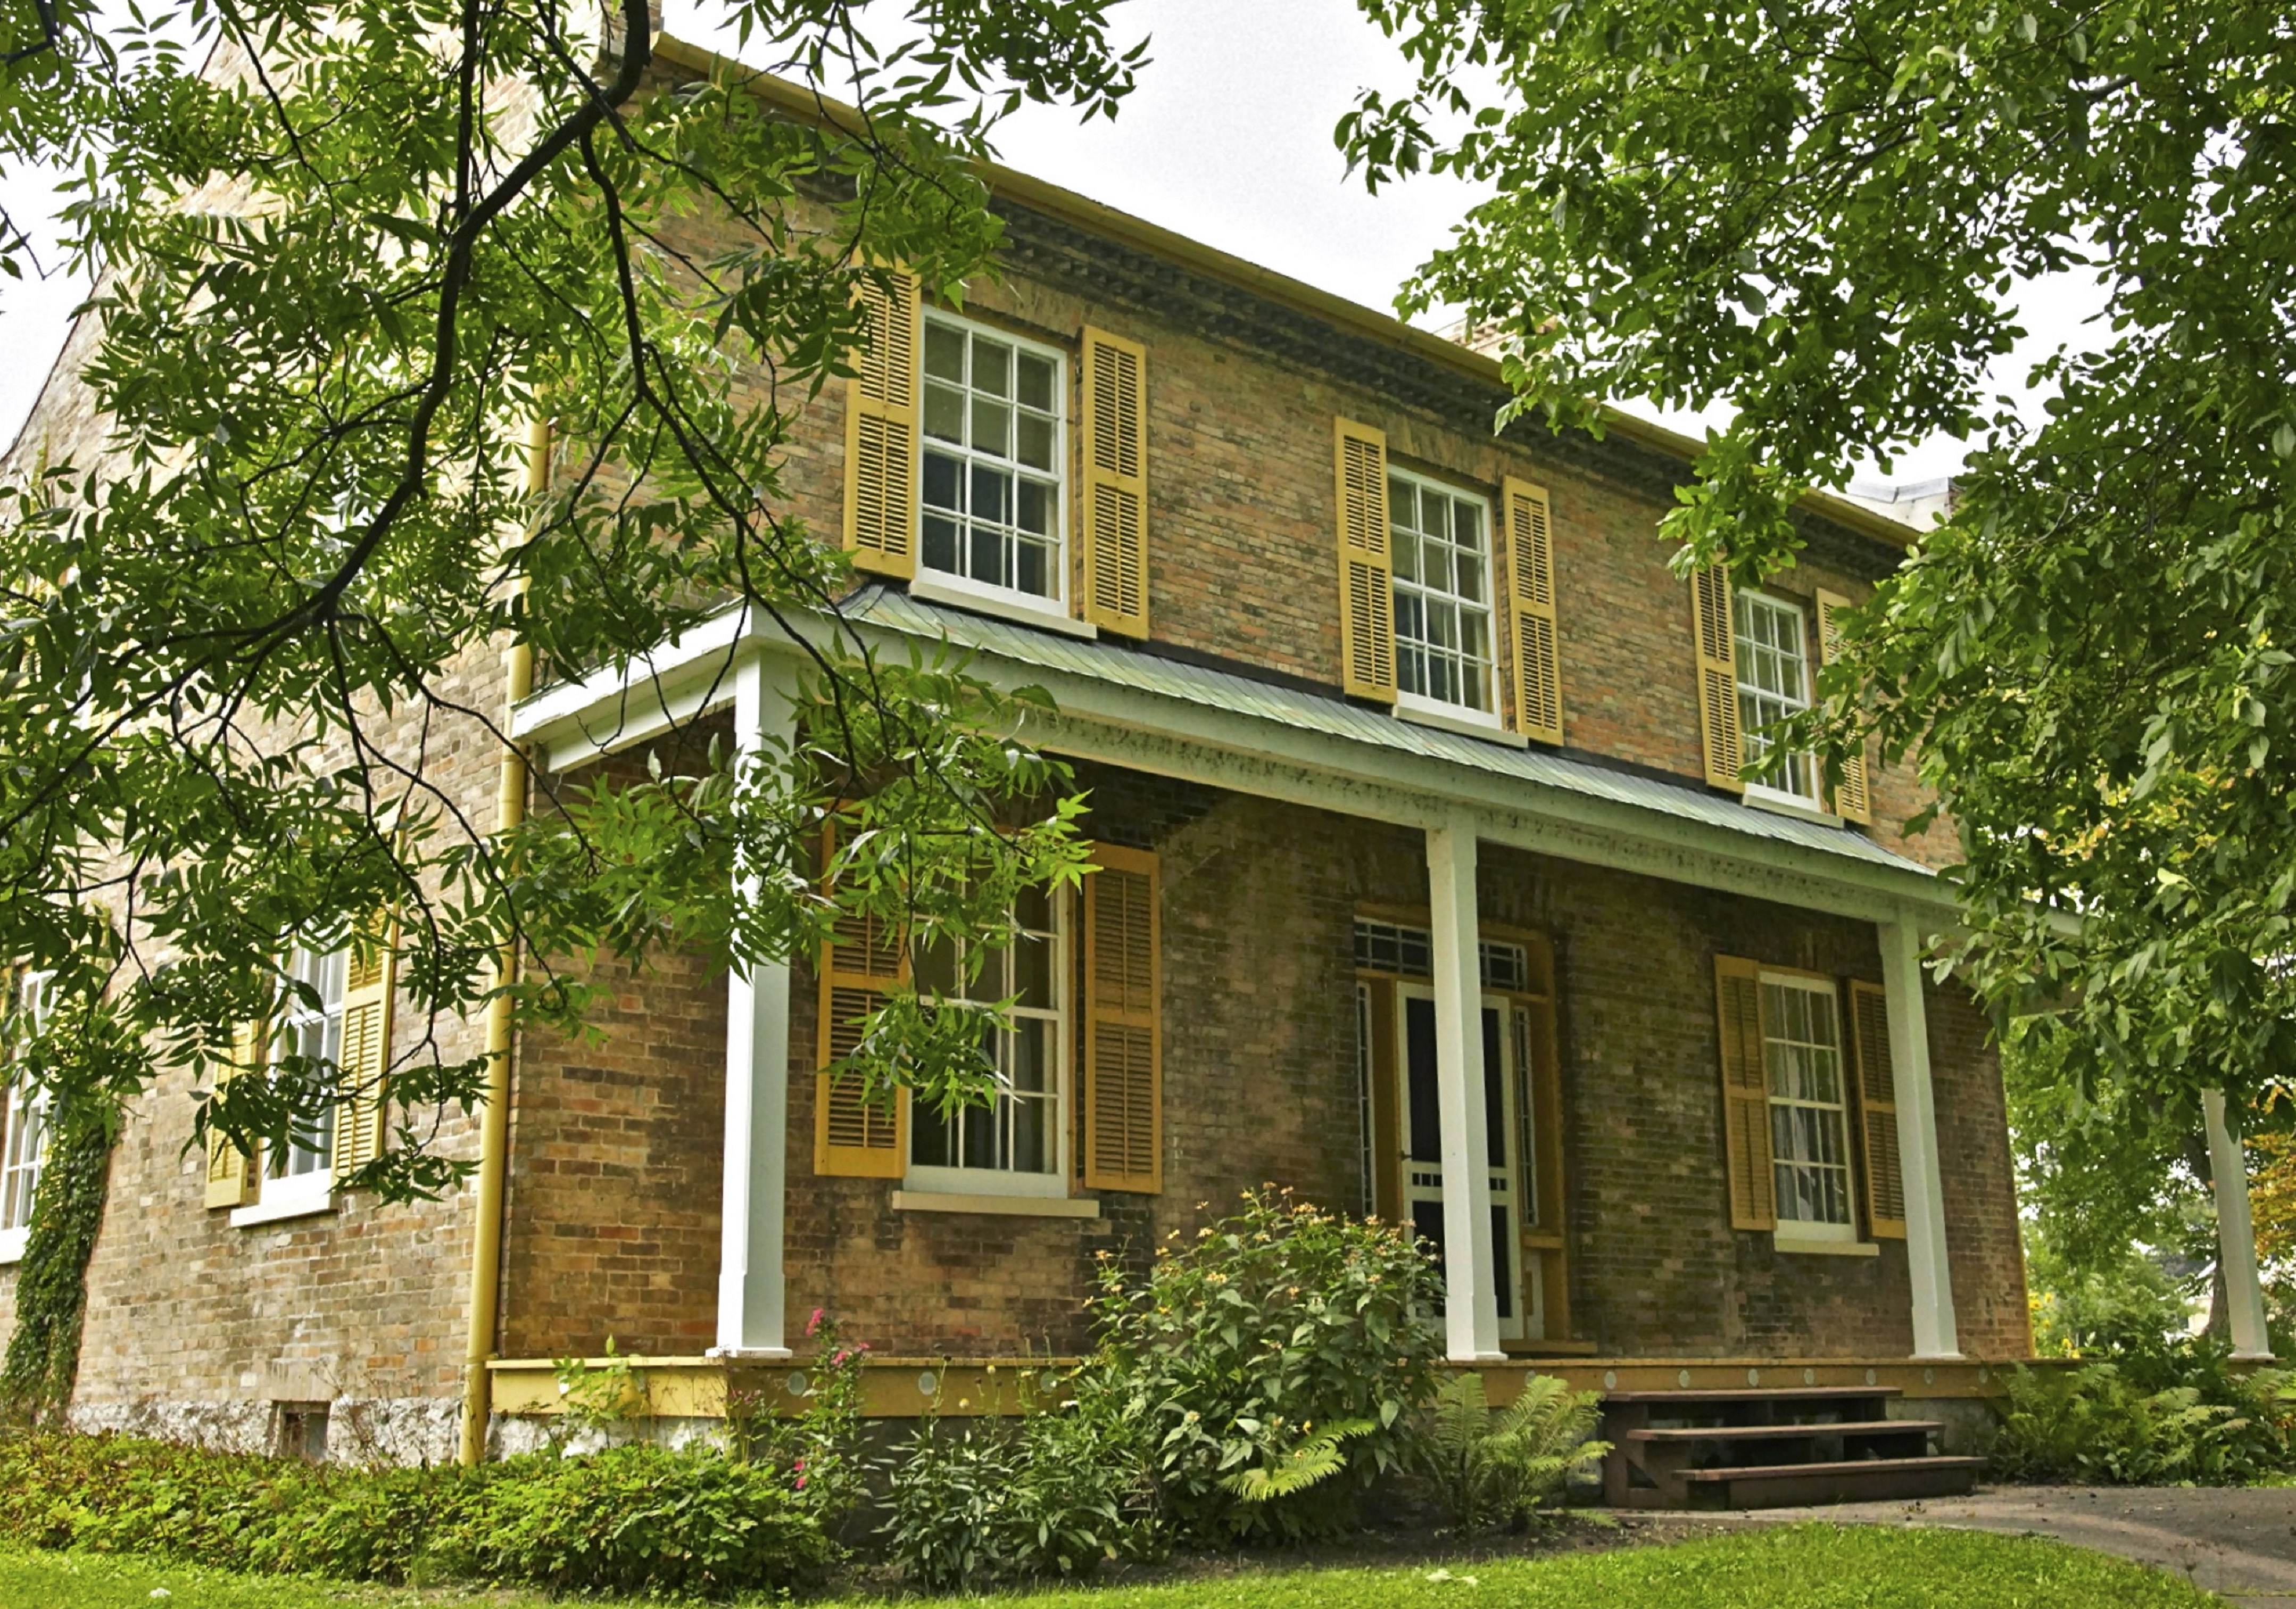 A photos of the Van Egmond House, which is now a museum.